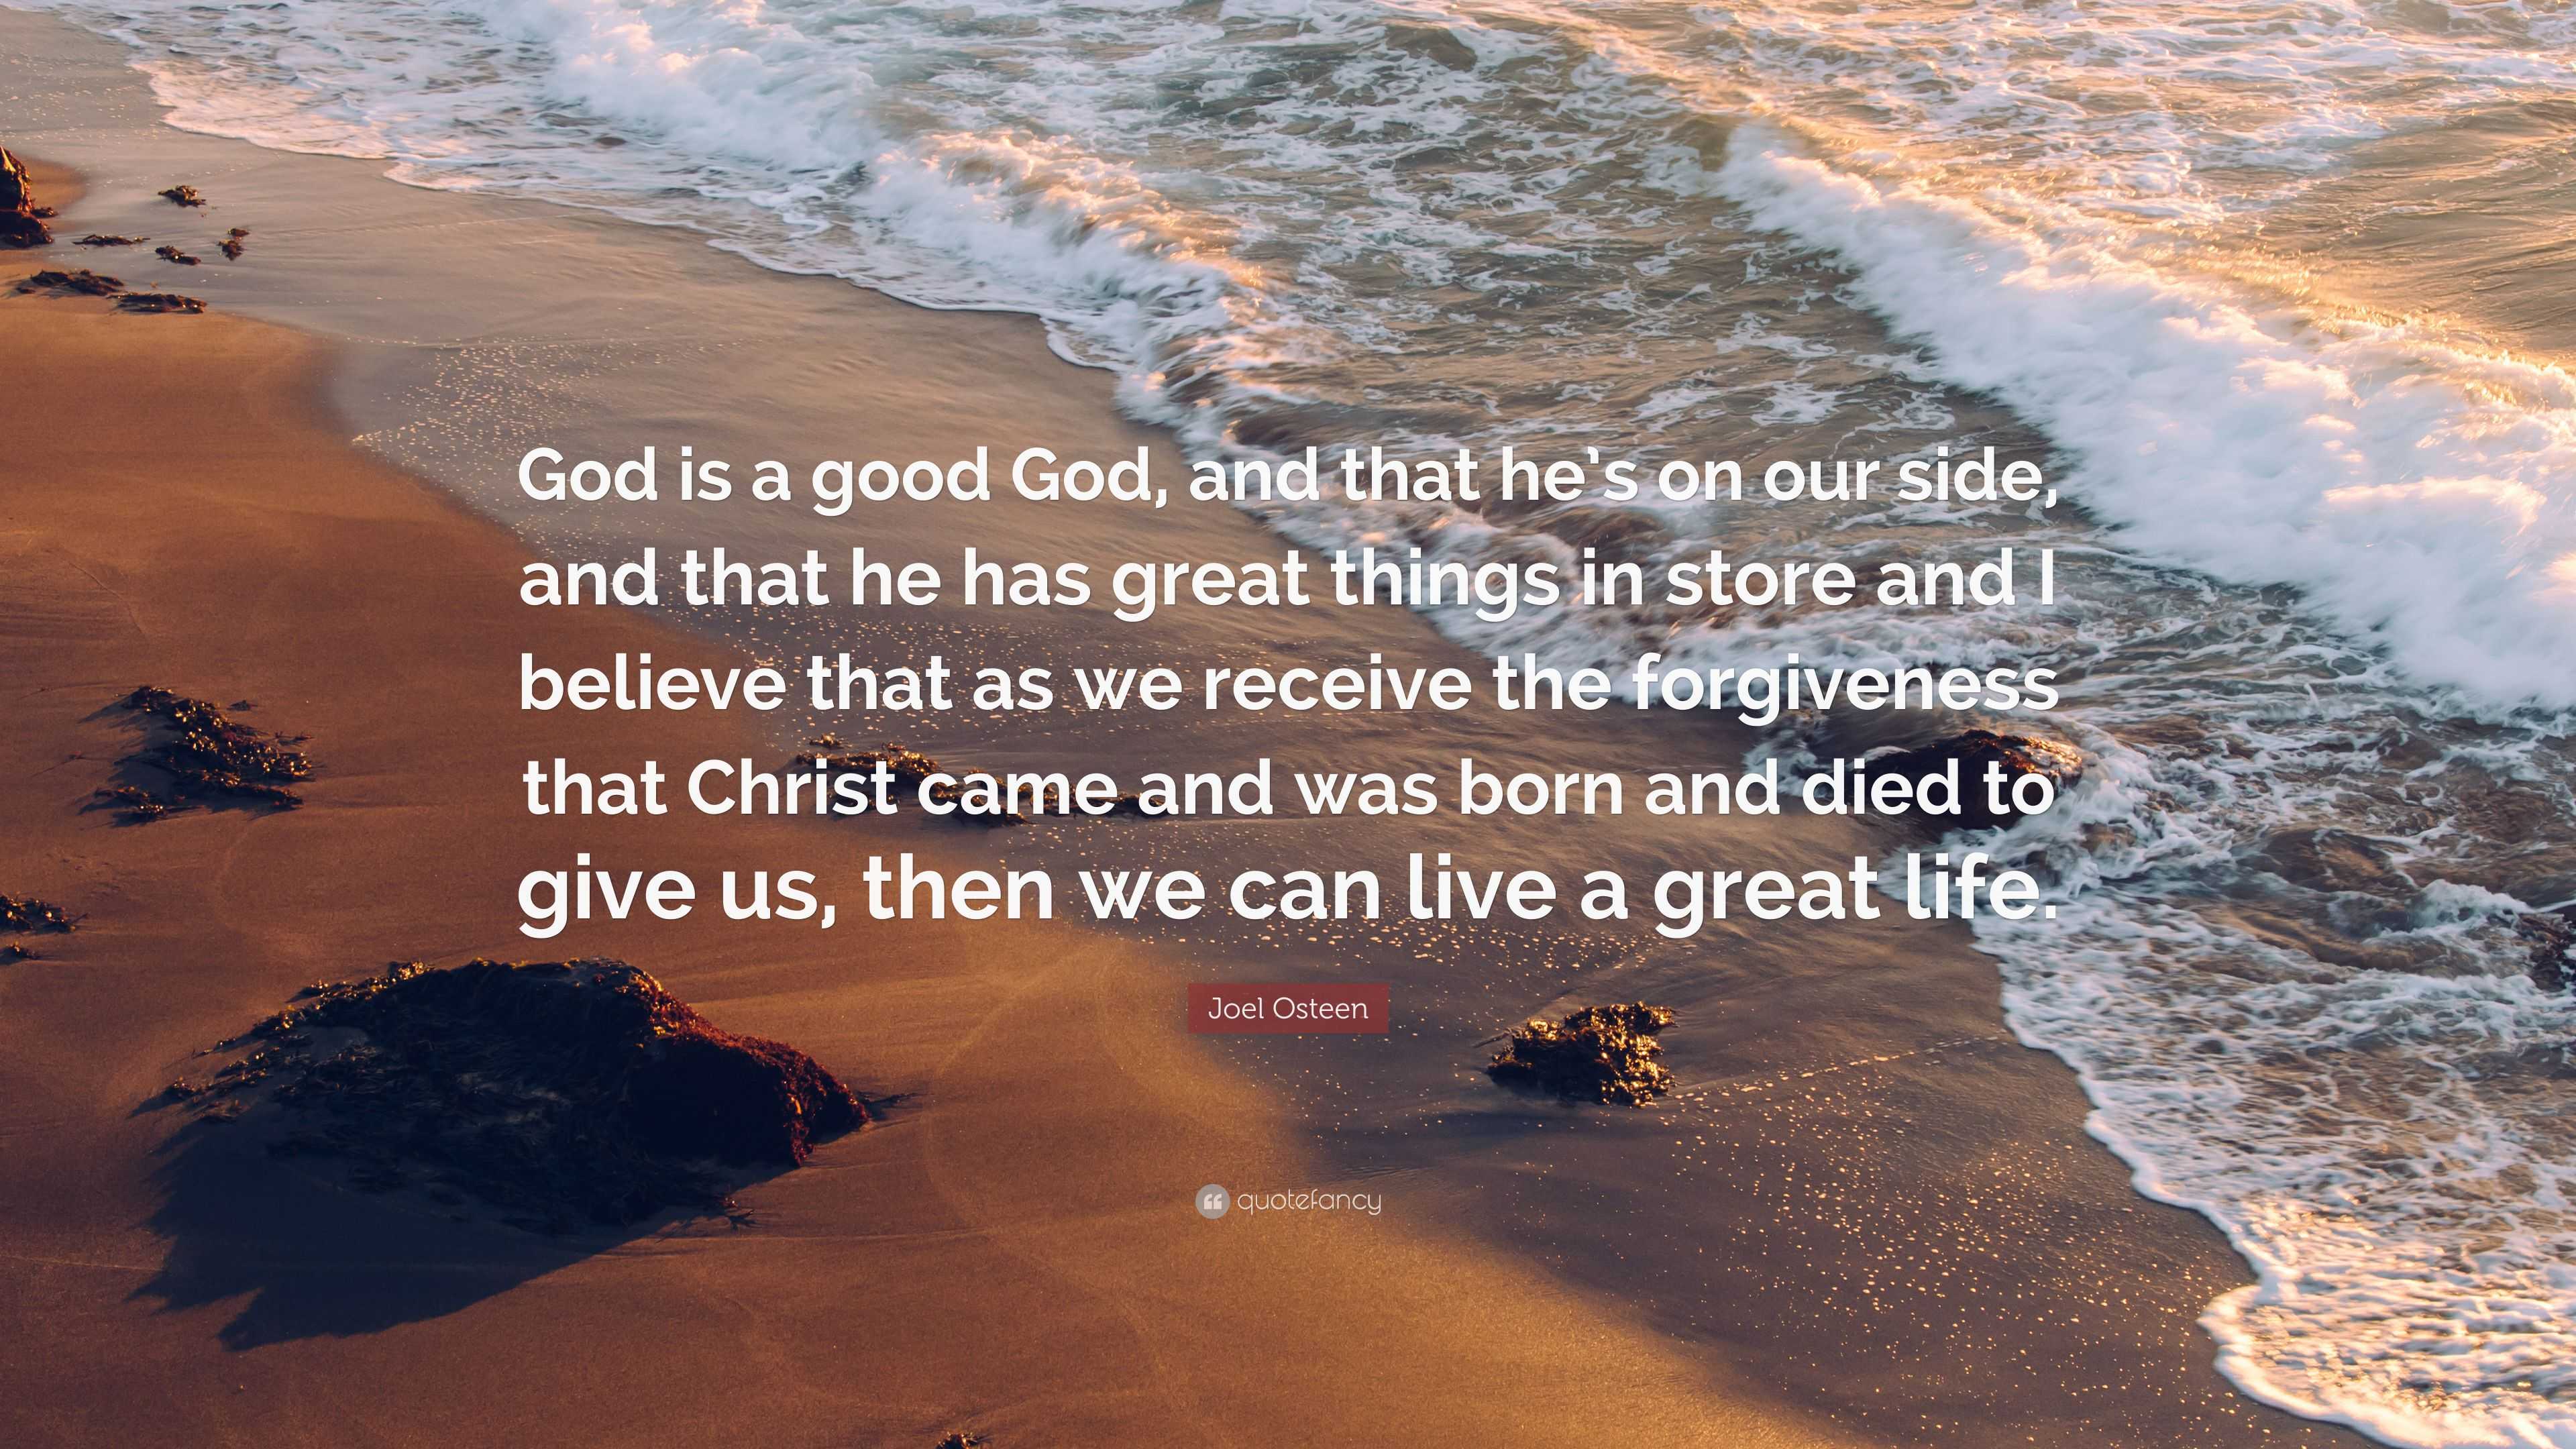 Joel Osteen Quote: “God is a good God, and that he’s on our side, and ...